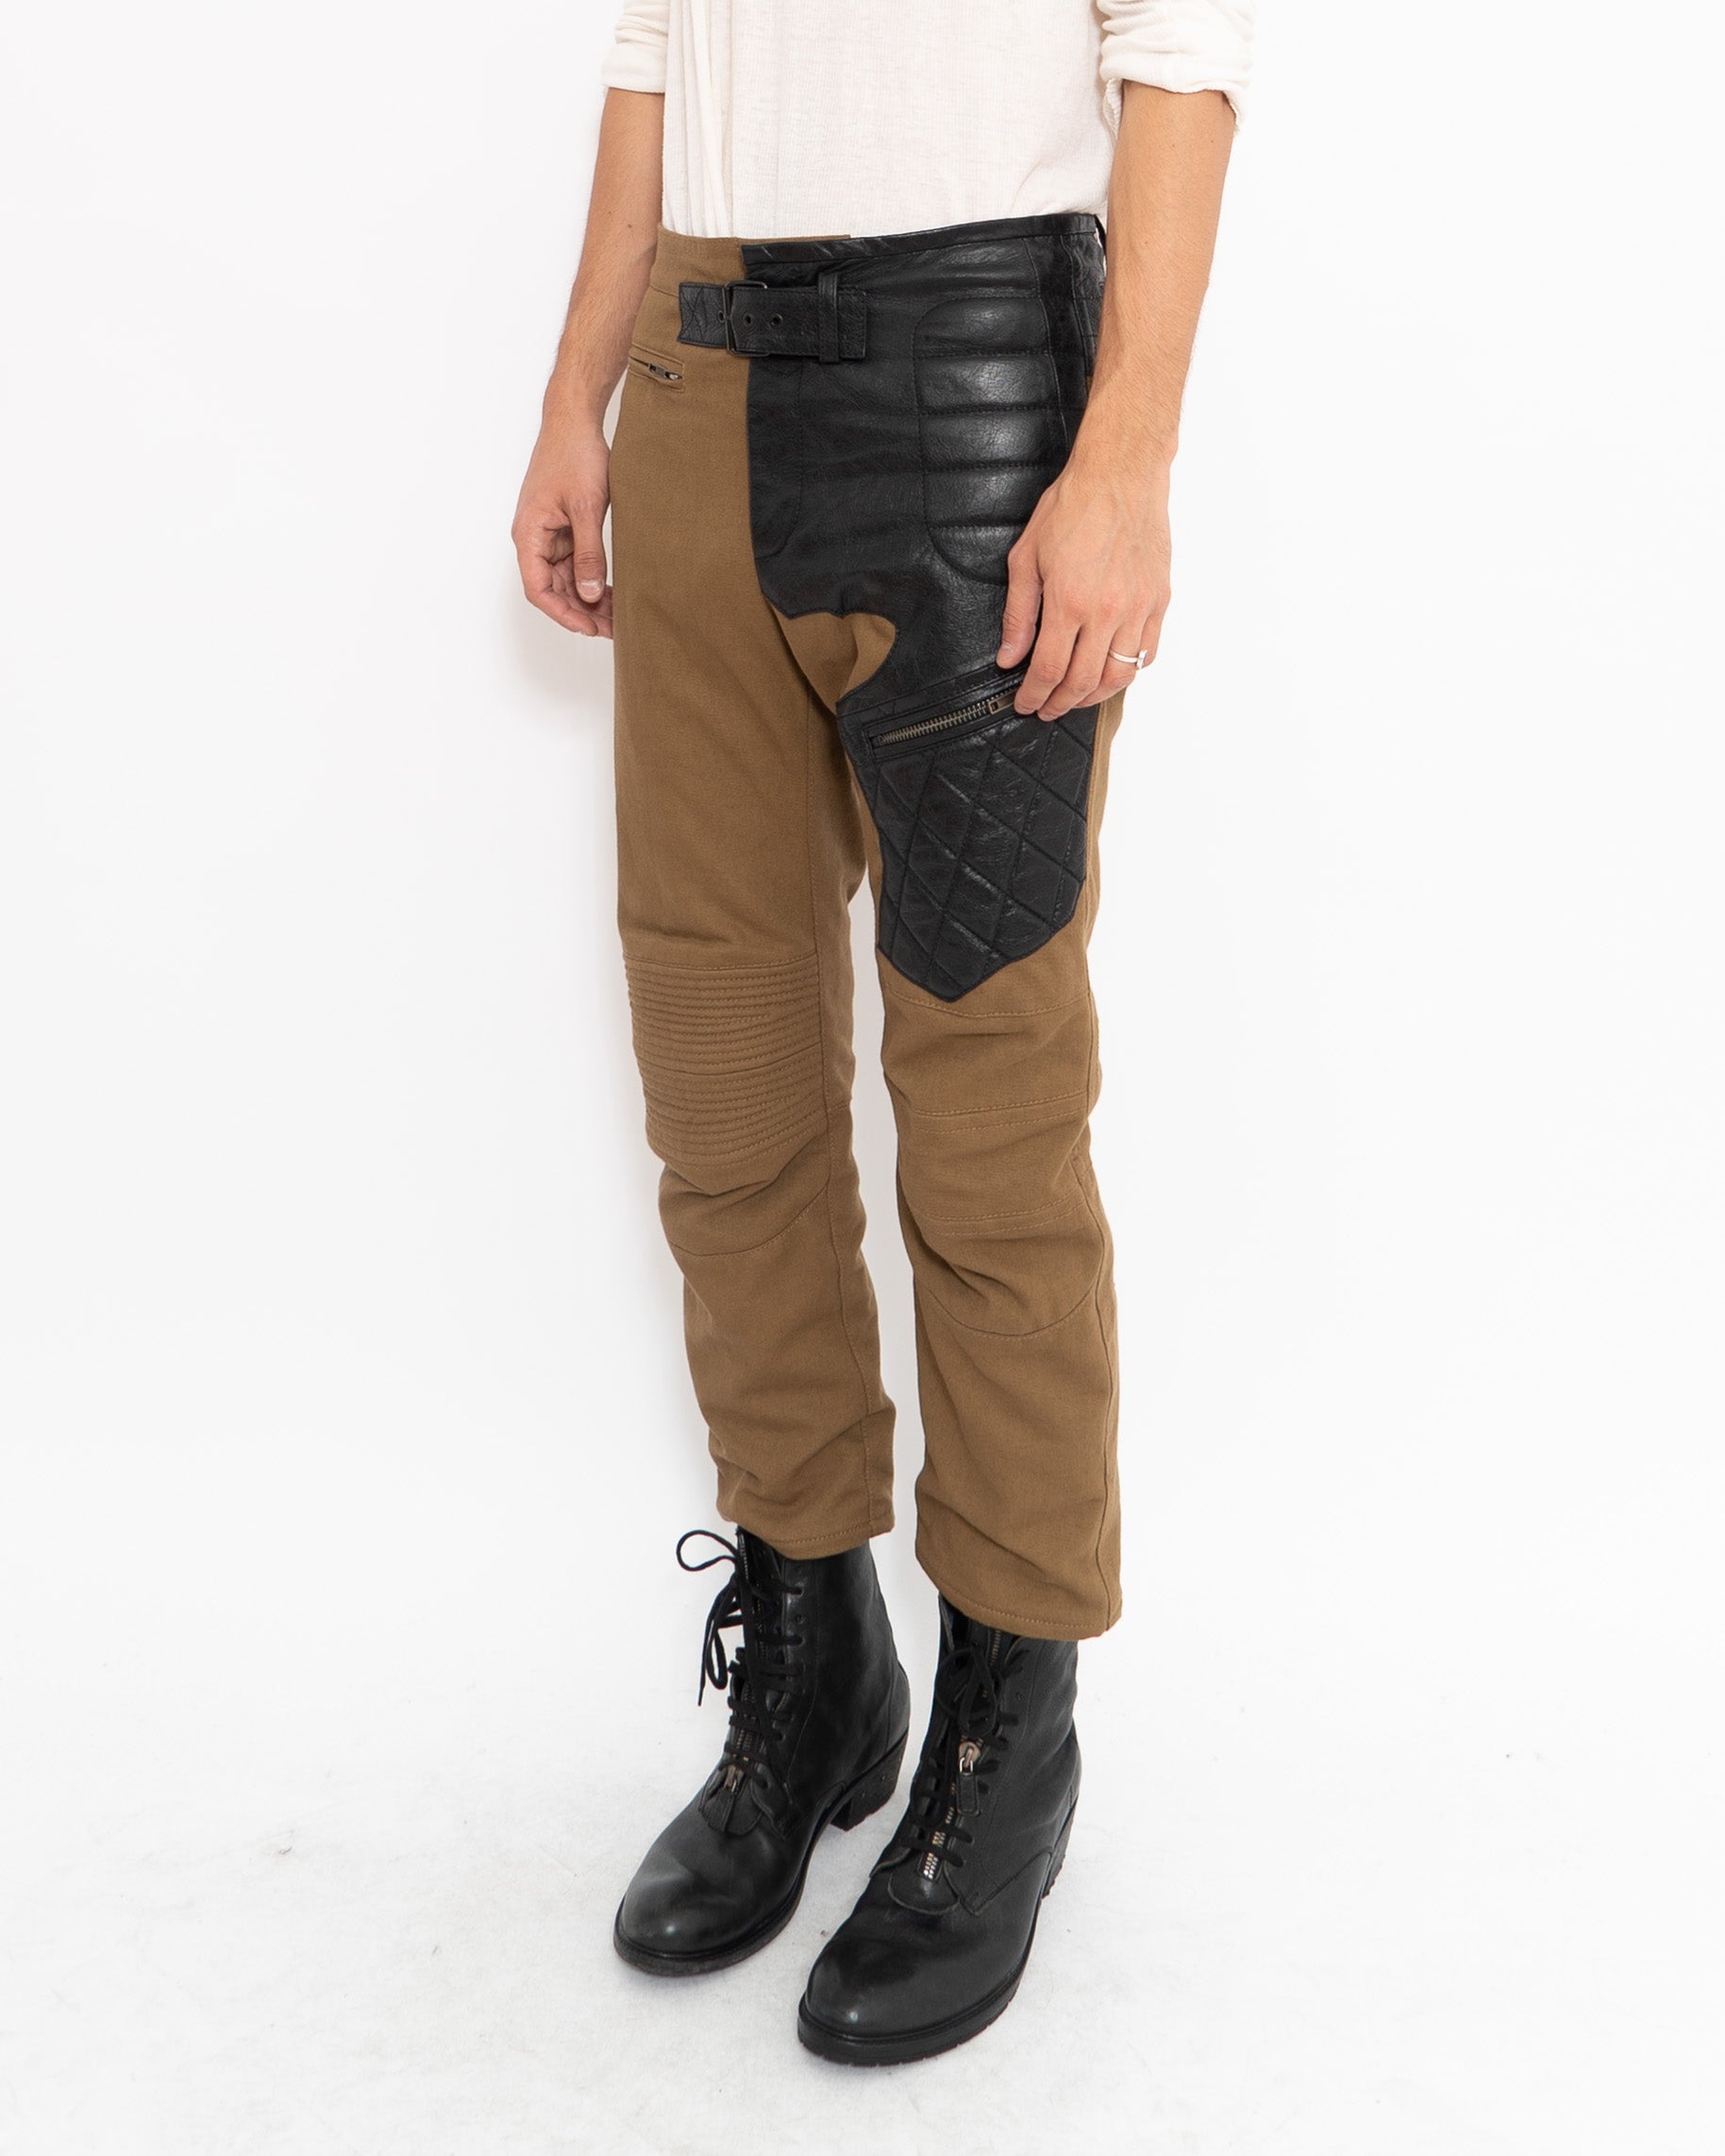 FW17 Camel Leather Patched Biker Trousers Sample